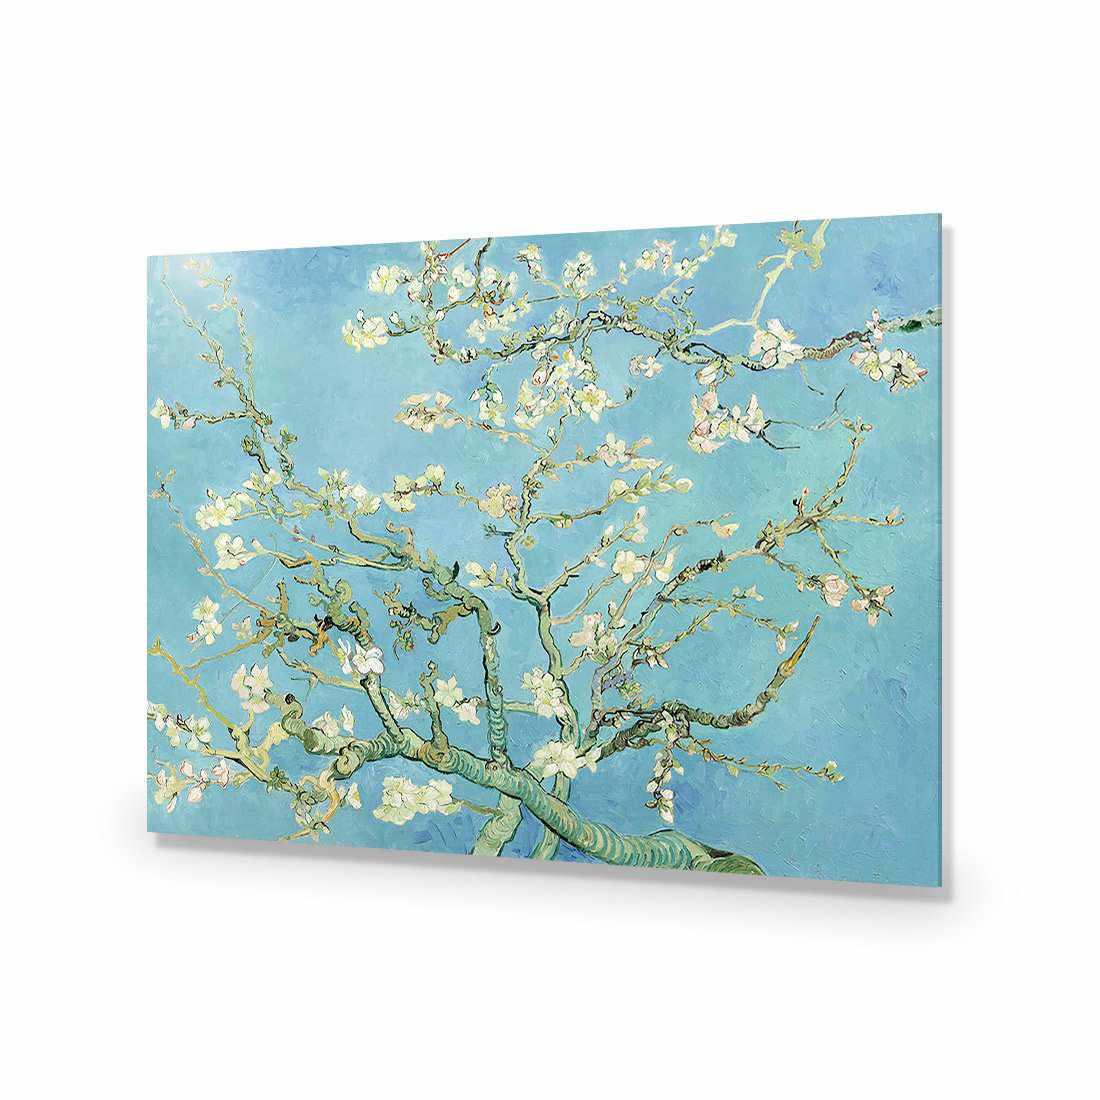 Blossoming Almond Tree - Van Gogh-Acrylic-Wall Art Design-Without Border-Acrylic - No Frame-45x30cm-Wall Art Designs